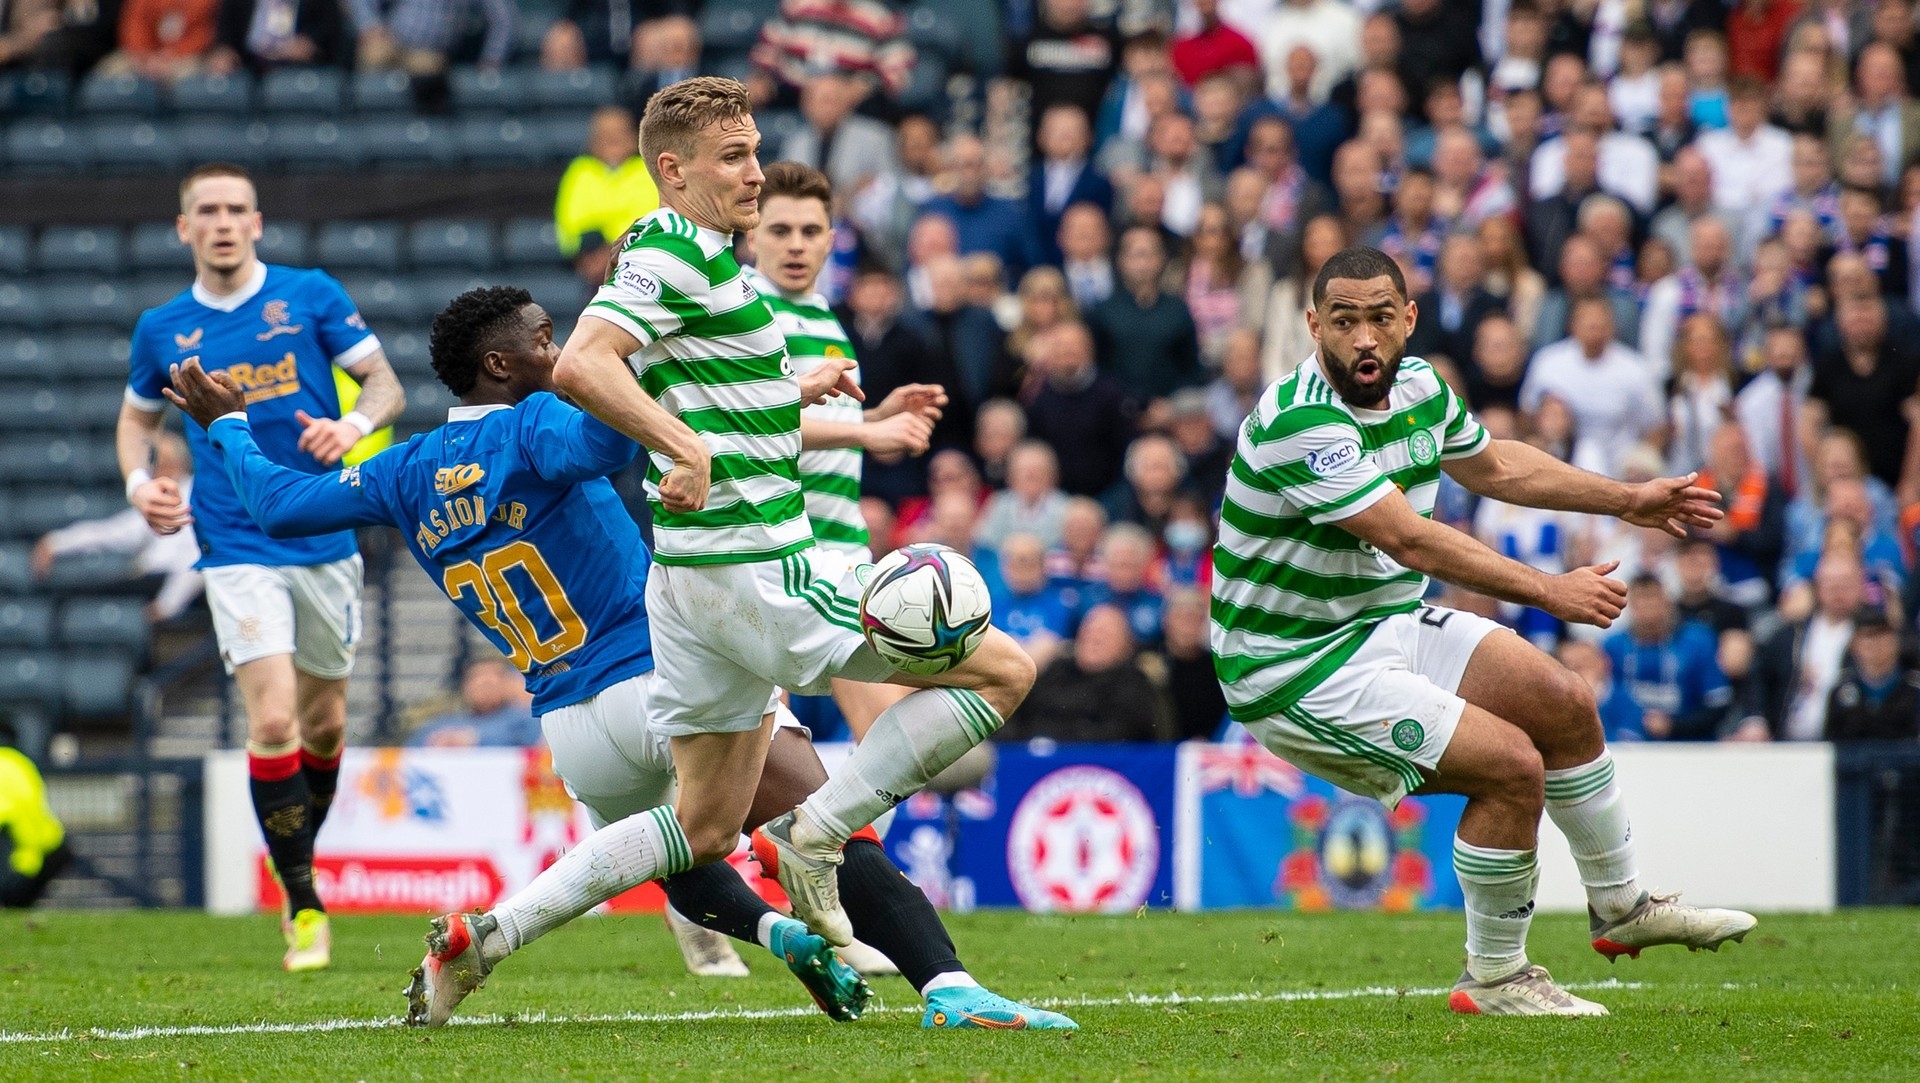 Fashion Sakala, pictured scoring against Celtic, could lead the line in Leipzig.